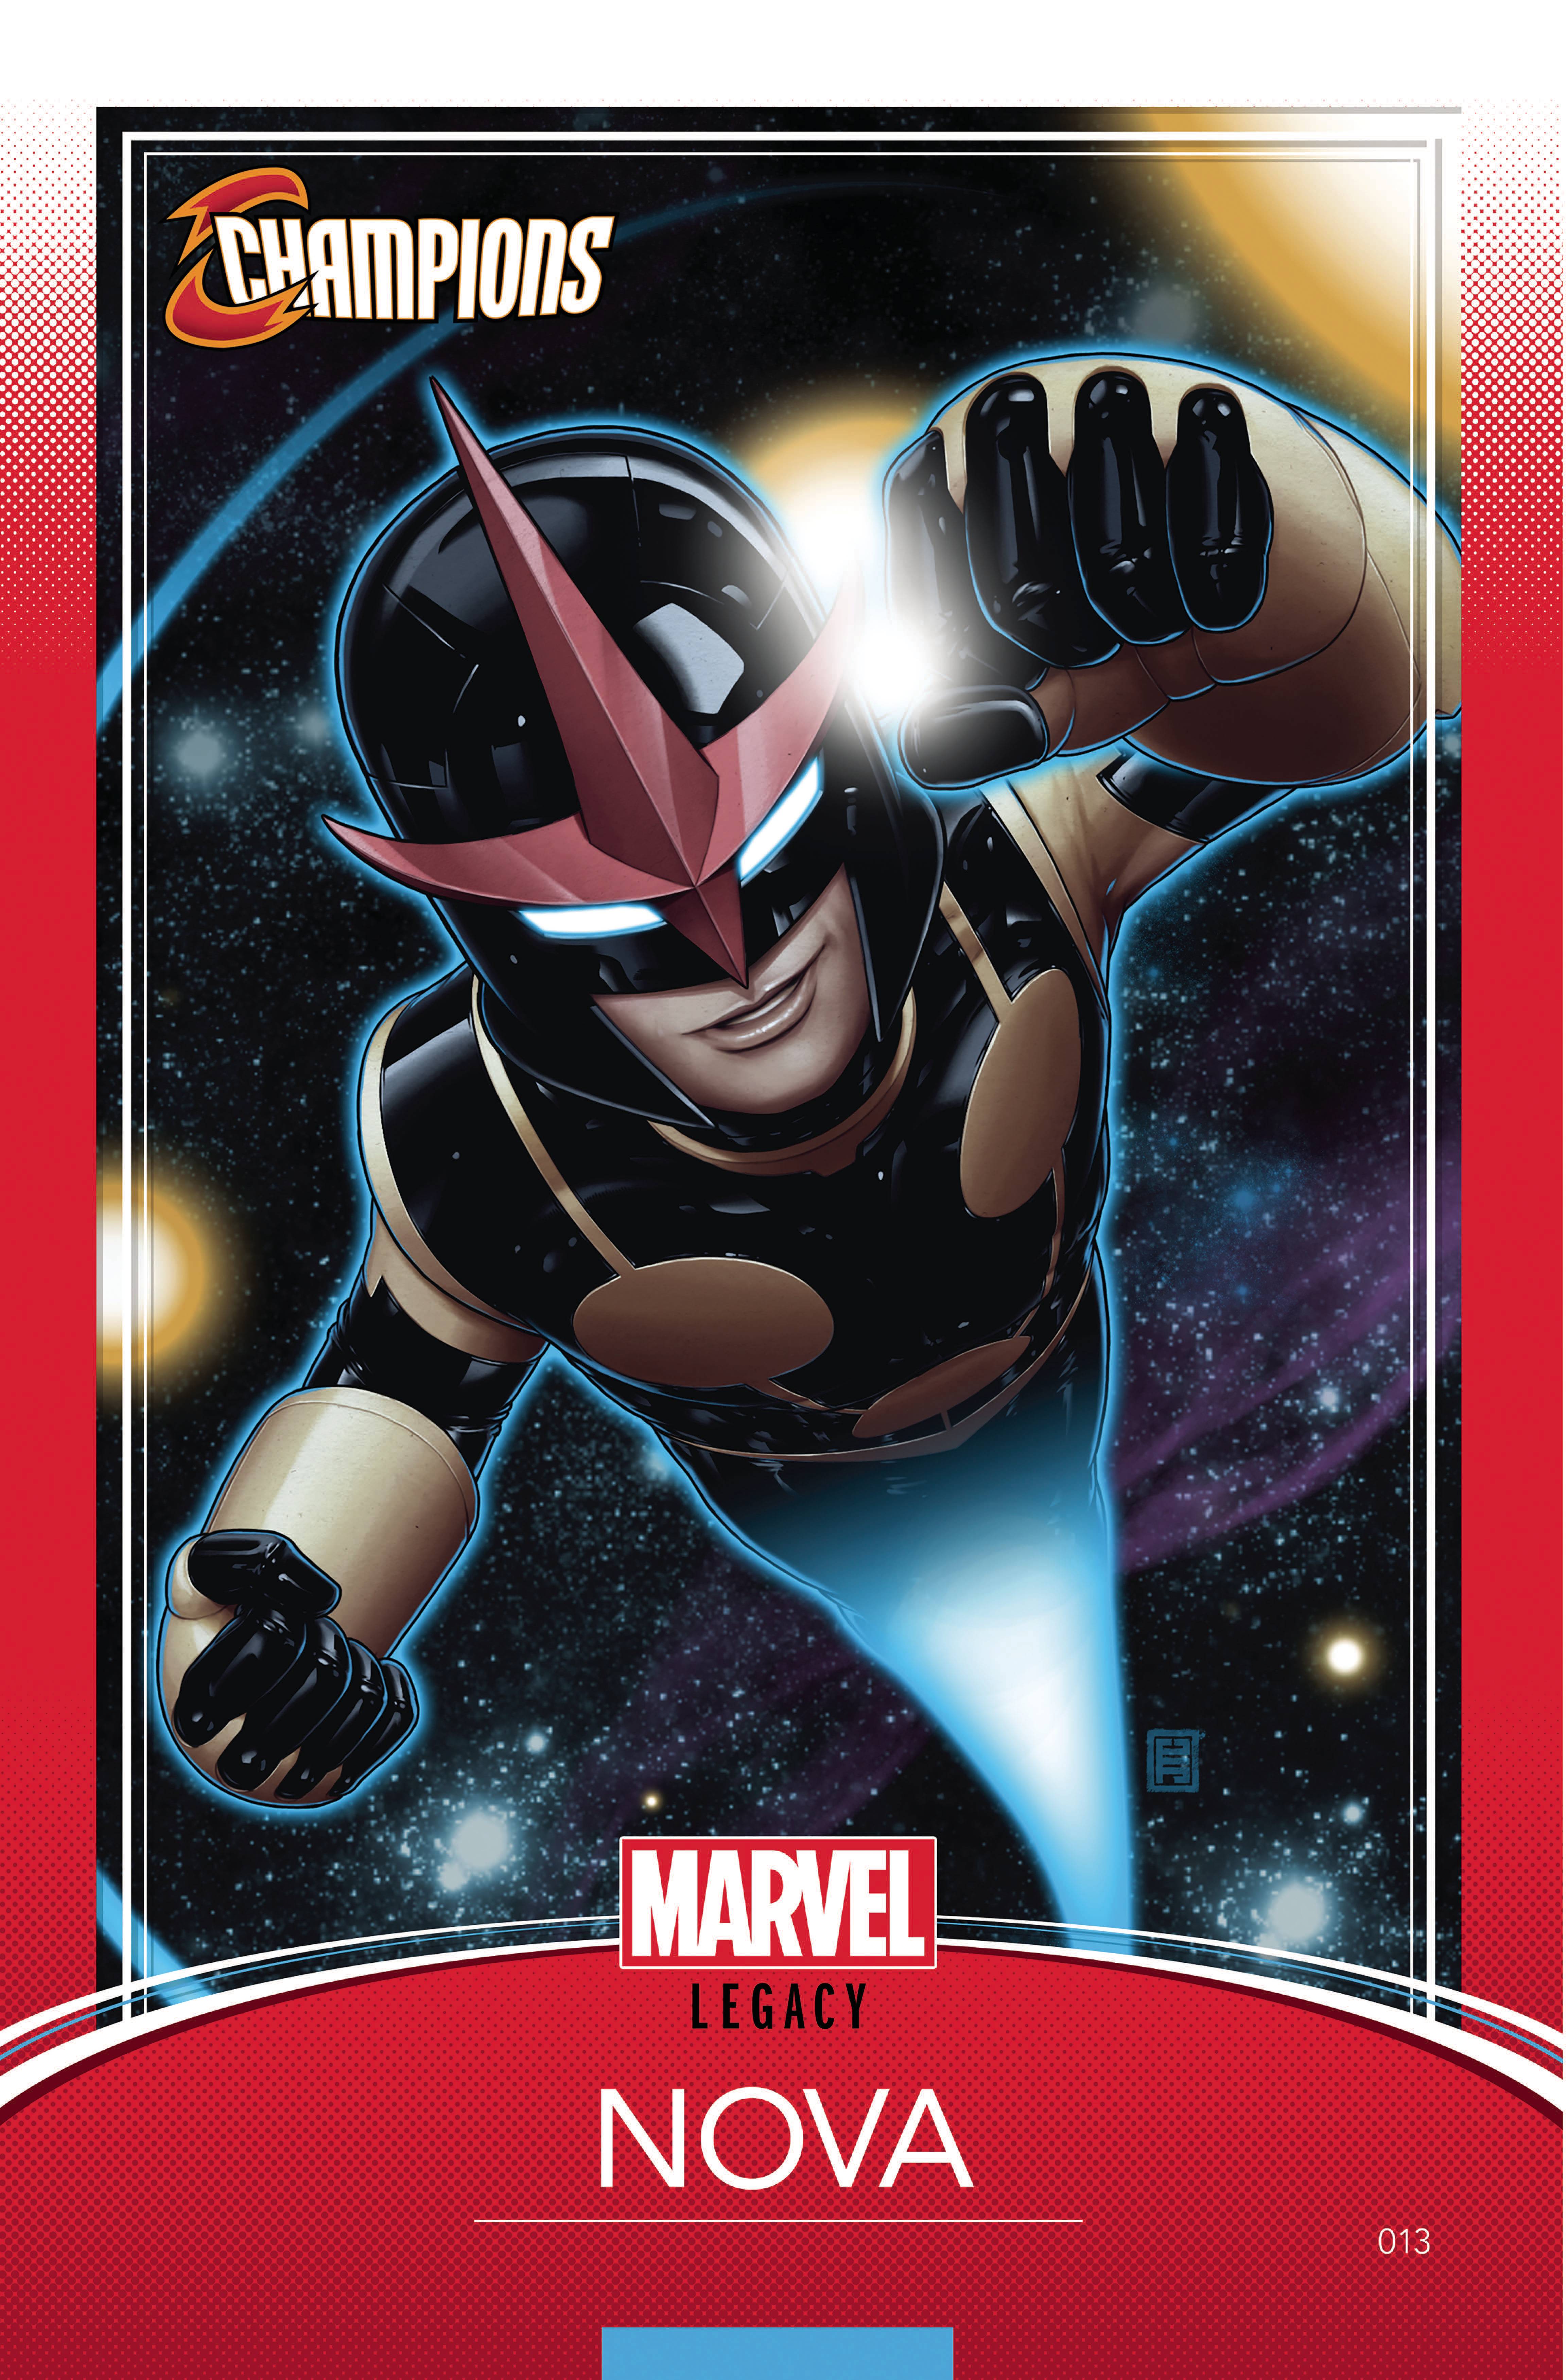 Champions #13 Christopher Trading Card Variant Legacy (2016)